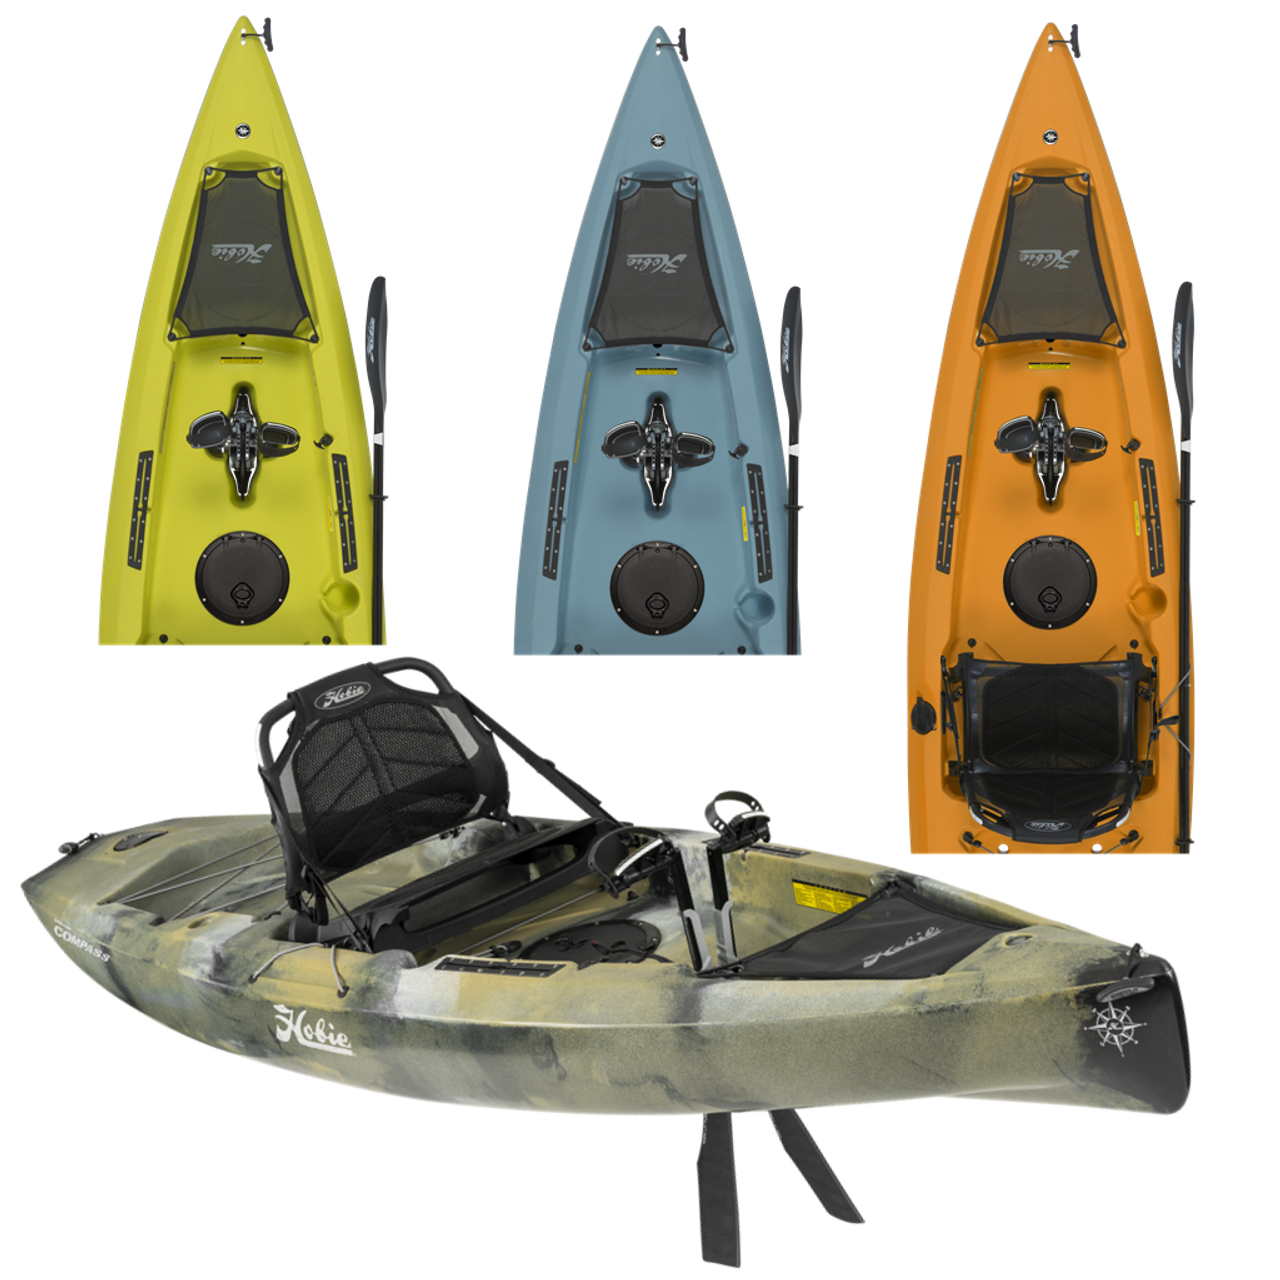 2022 Hobie Mirage Compass with 180 Kick-Up Fins